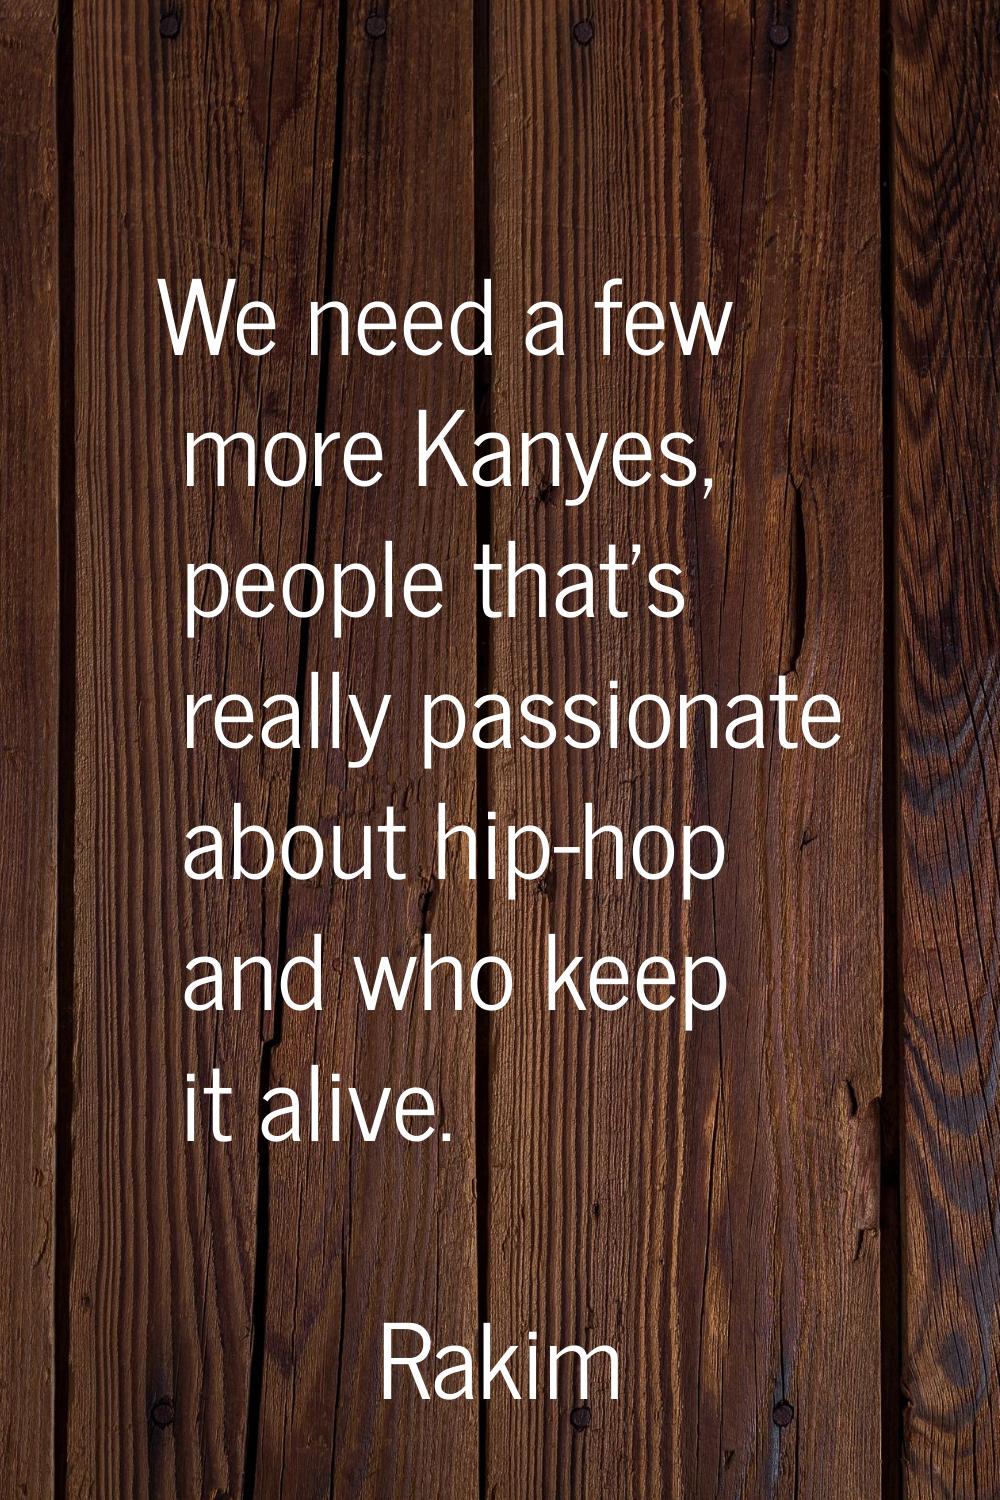 We need a few more Kanyes, people that's really passionate about hip-hop and who keep it alive.